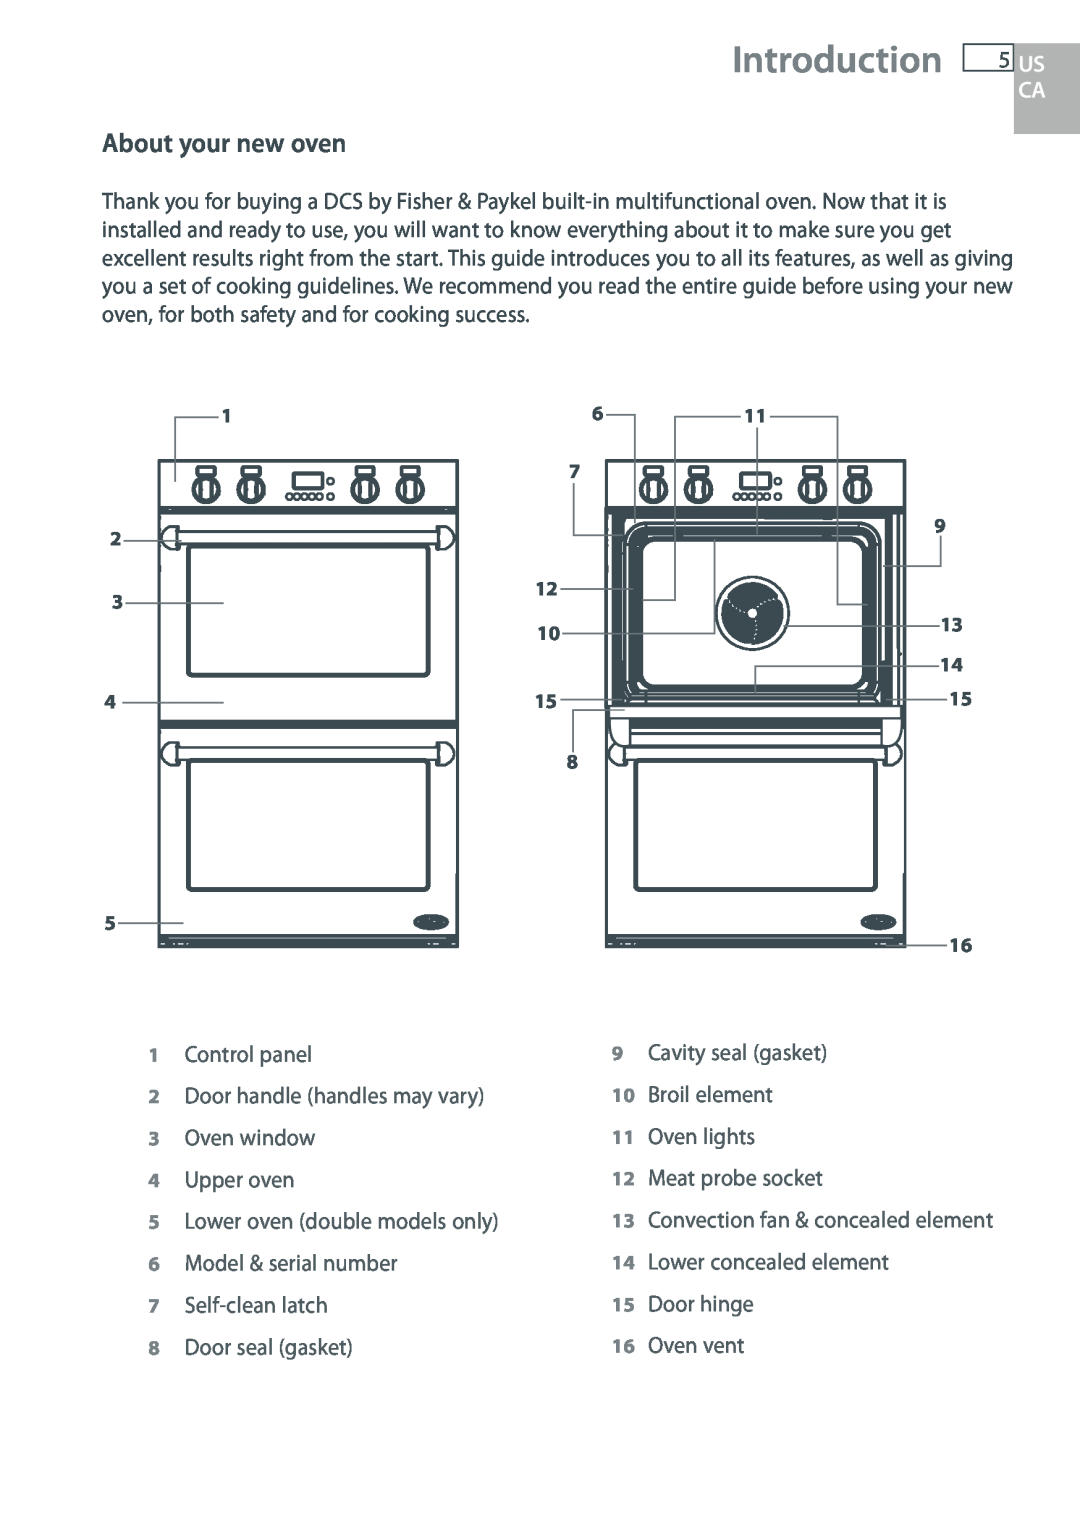 DCS WODU30, WOUD230, WOU130, WOSU30 manual Introduction, About your new oven, Us Ca 